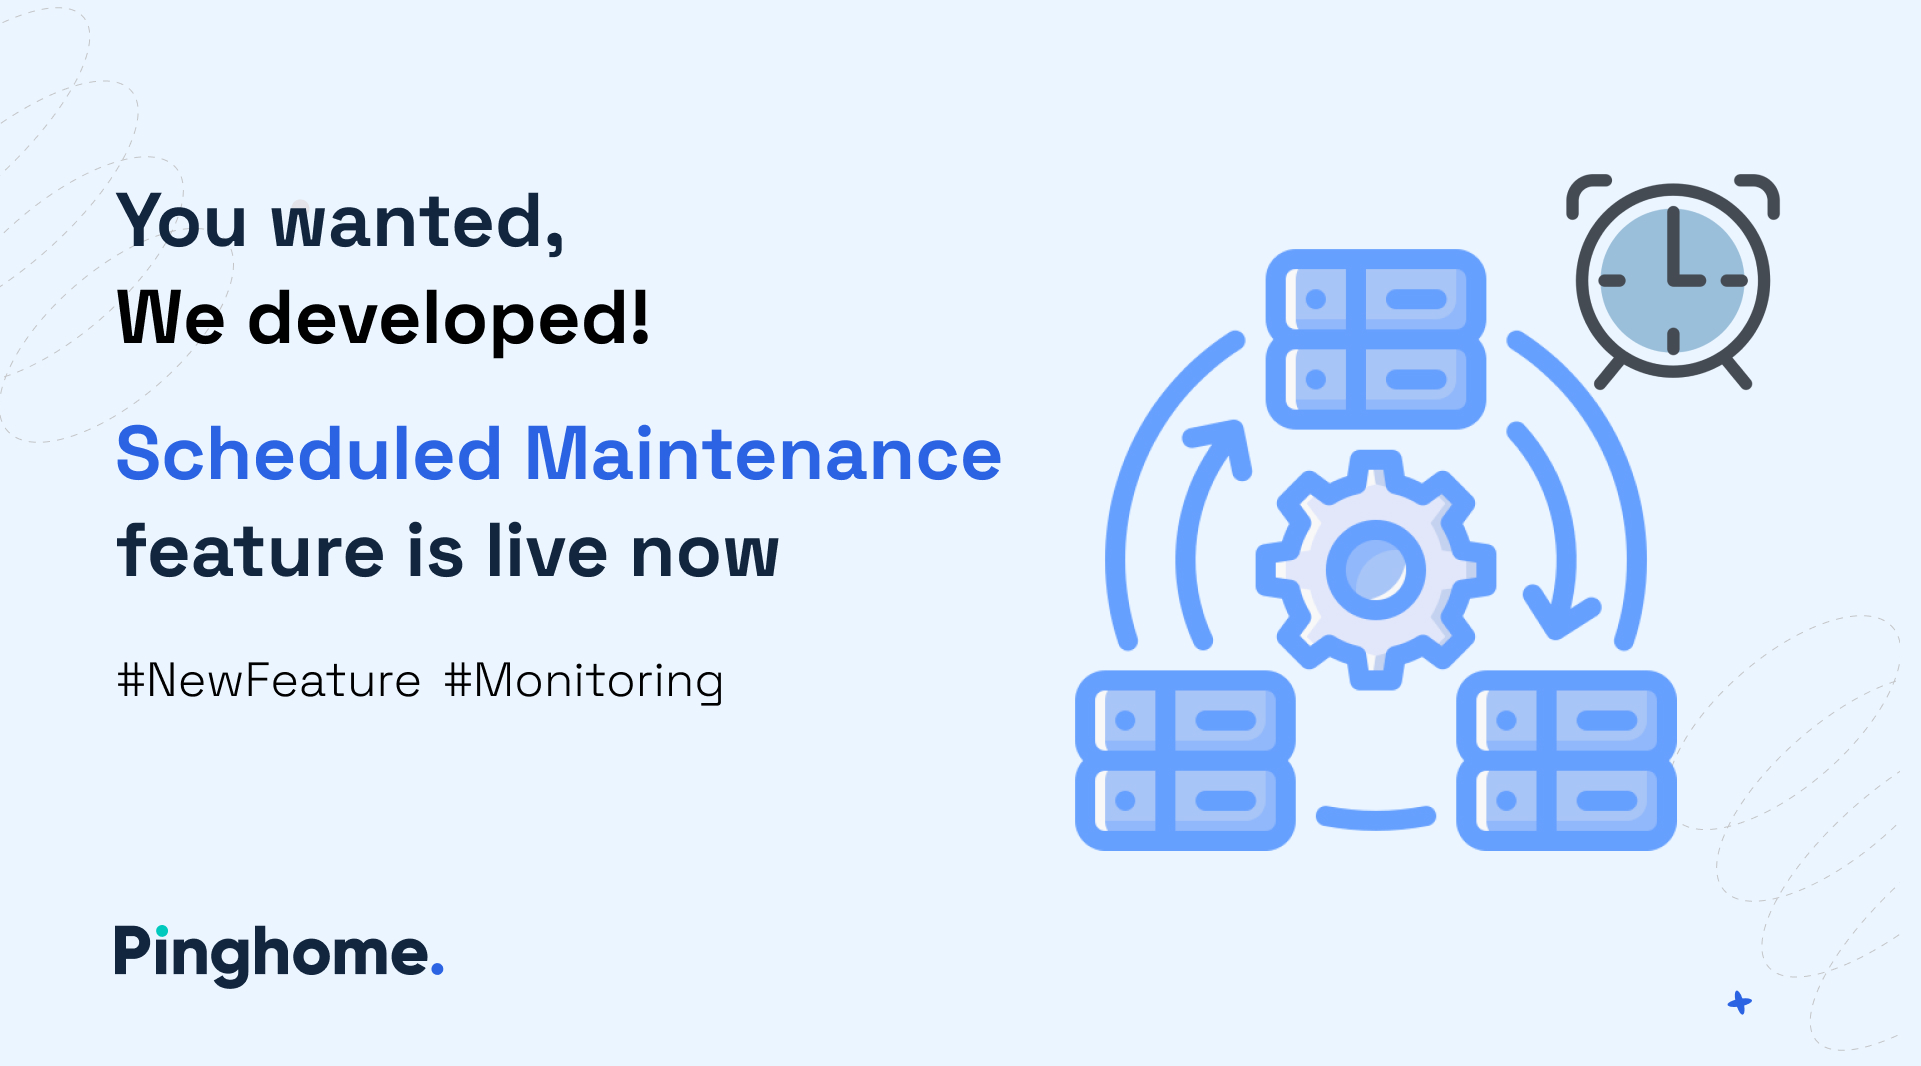 Scheduled maintenance period feature at Pinghome